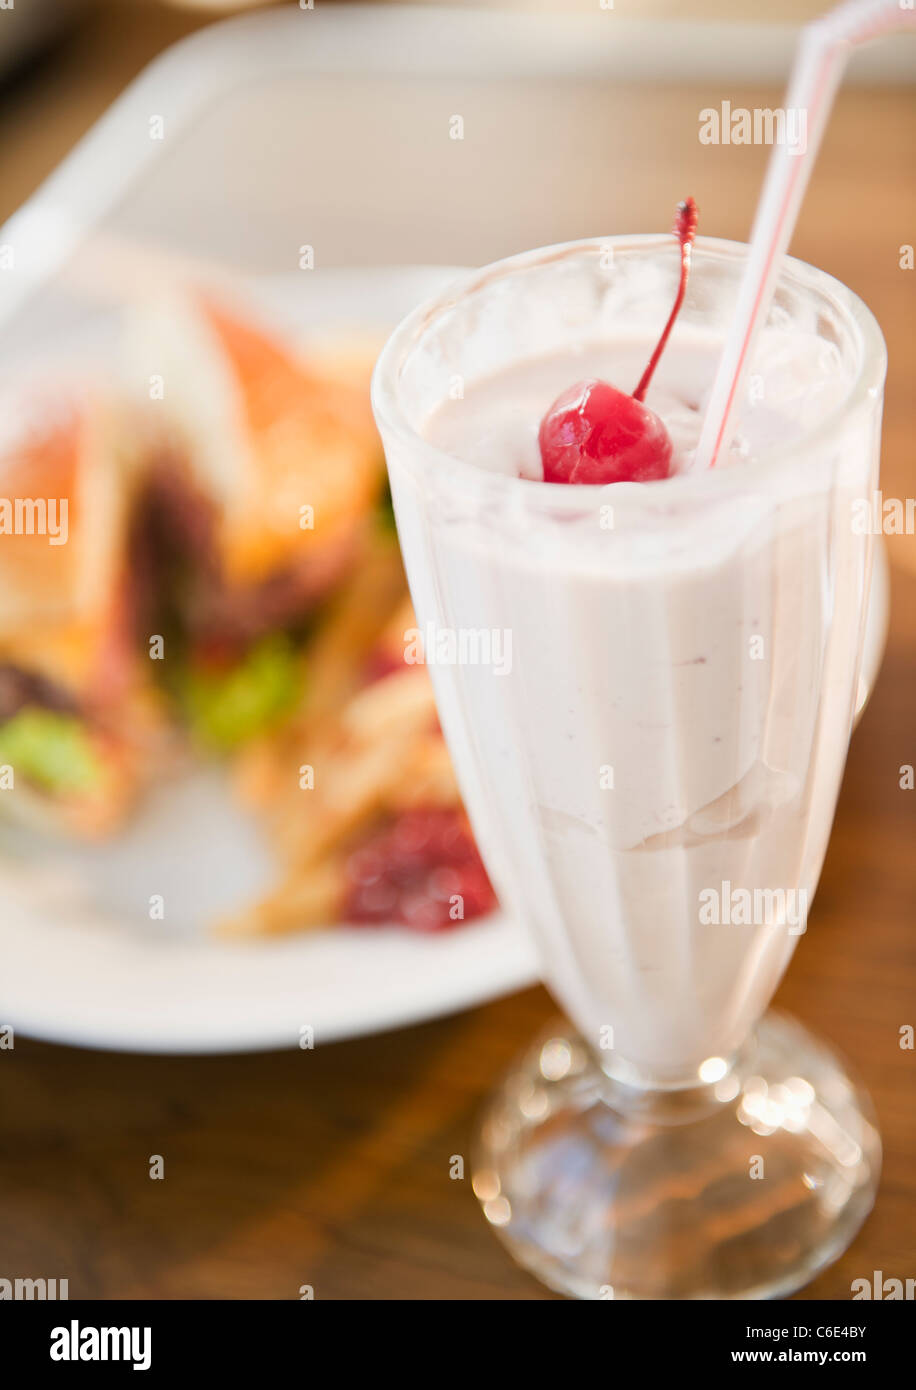 USA, New Jersey, Jersey City, Close up of meal and milkshake Stock Photo